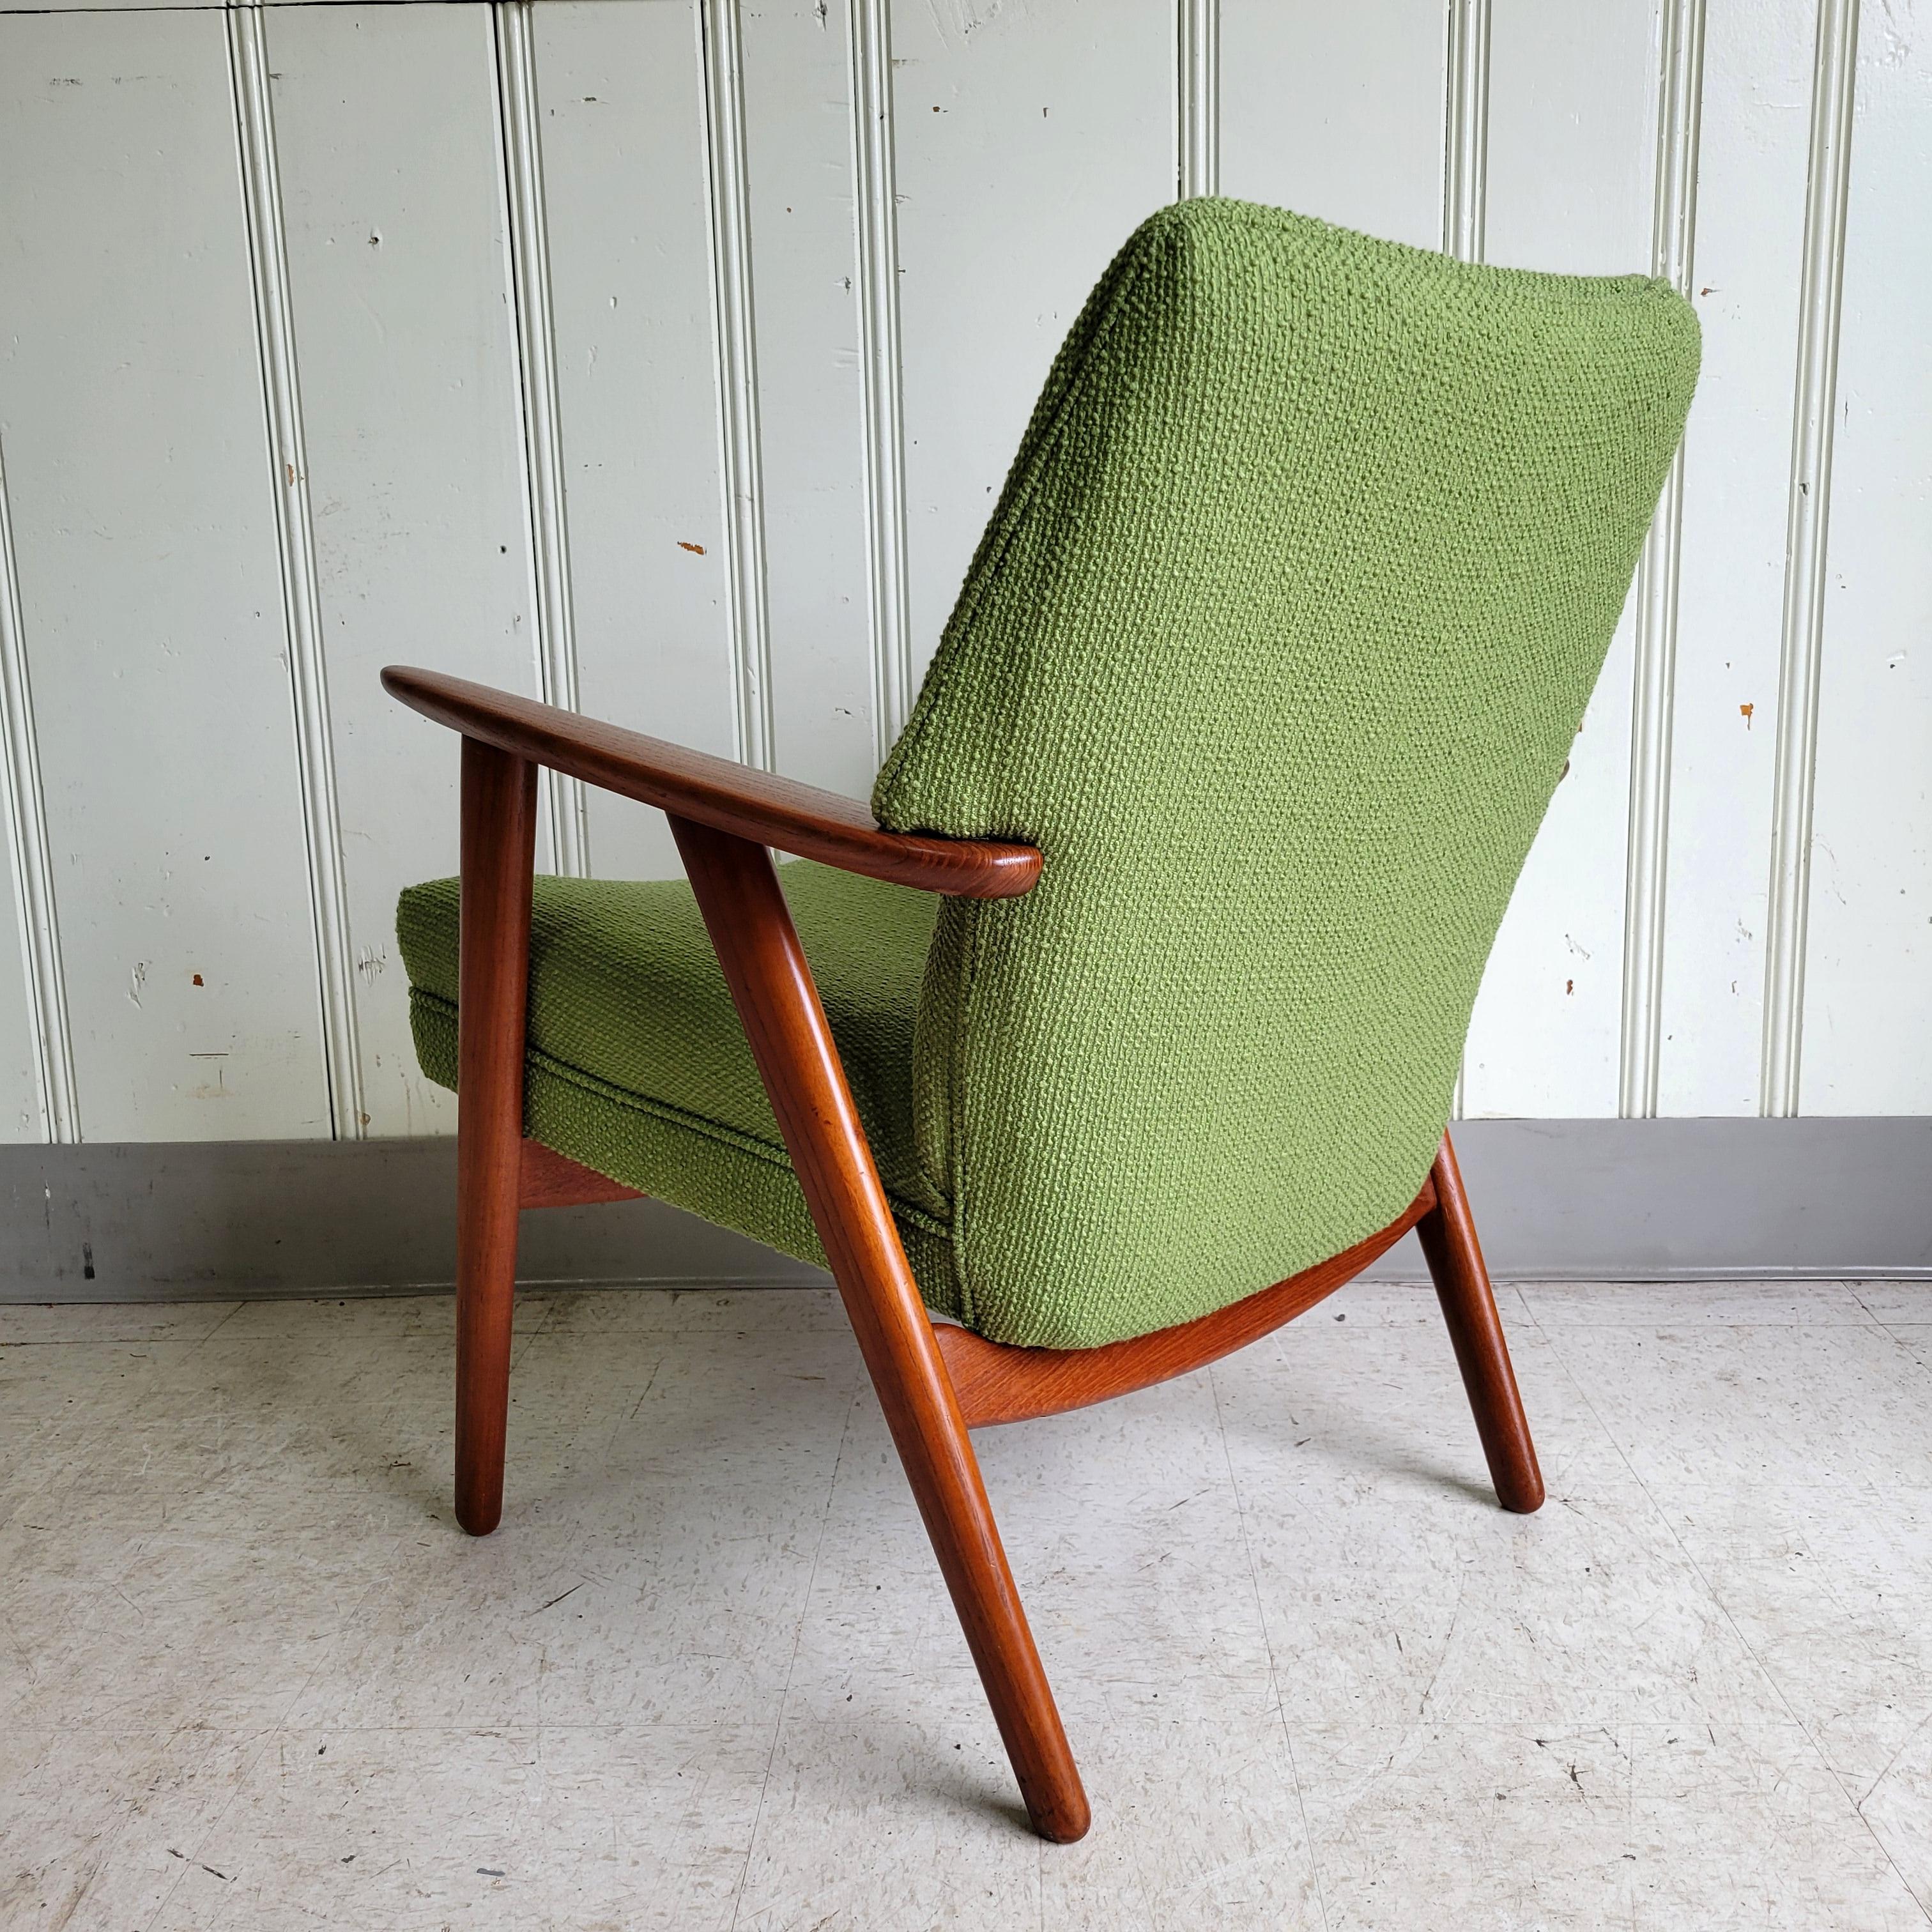 This beautifully designed and stately presence chair was designed by Kurt Olsen for Slagelse Møbelværk. In fully restored condition with a recently cleaned and oiled frame and newly upholstered seat.